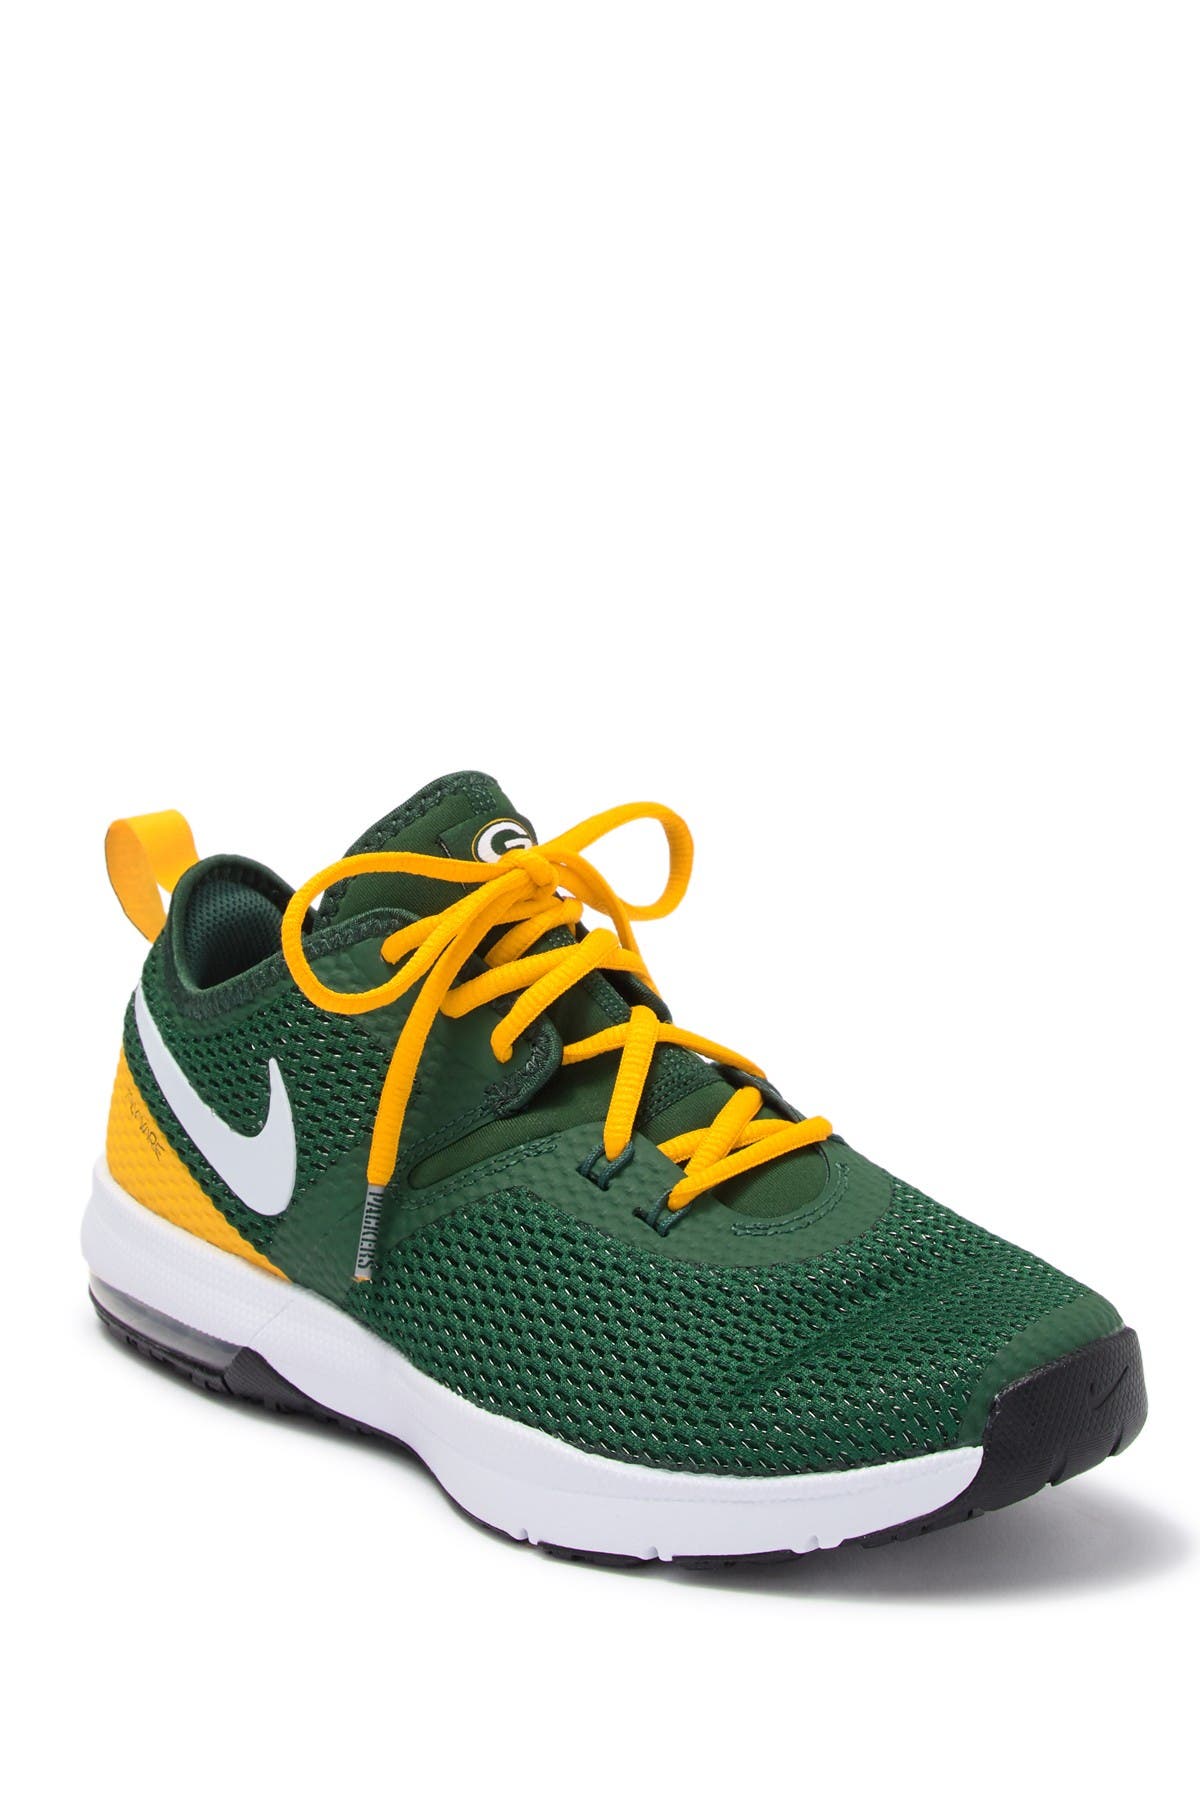 Air Max Typha 2 NFL Green Bay Packers 